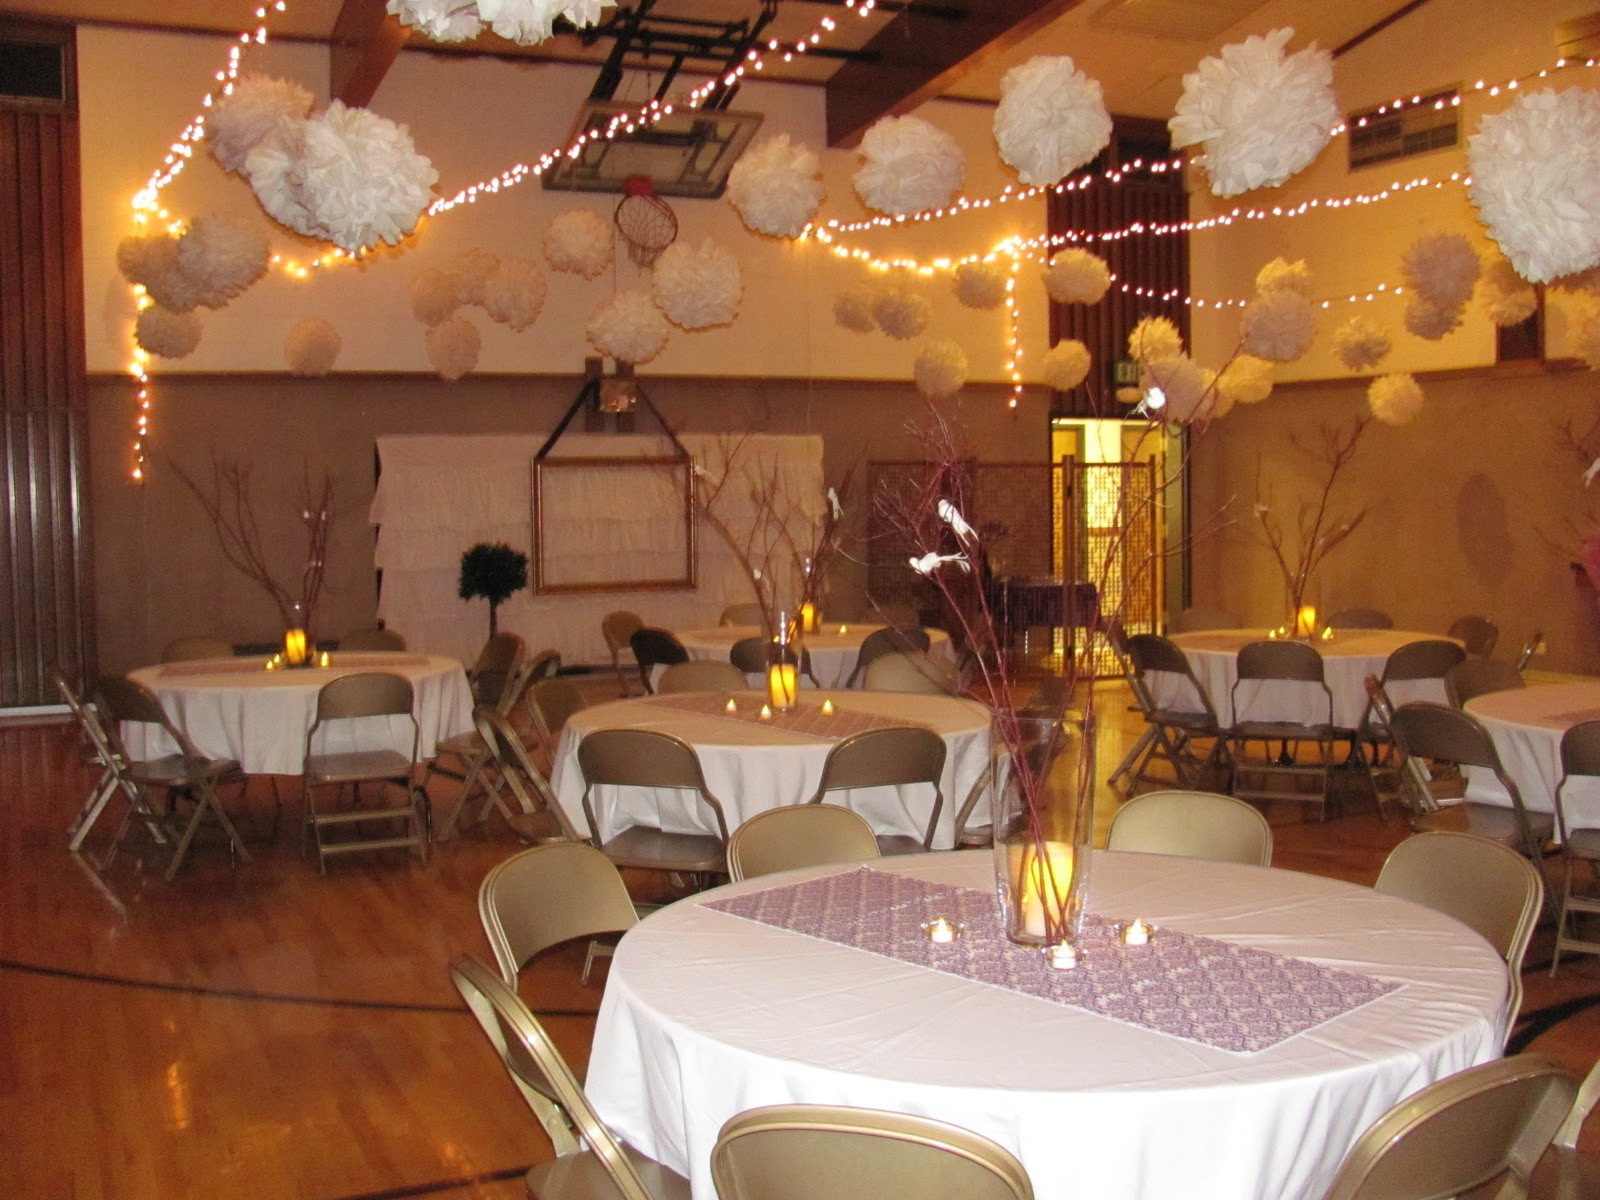 How To Decorate For A Wedding
 Header Wedding Open House Decorating